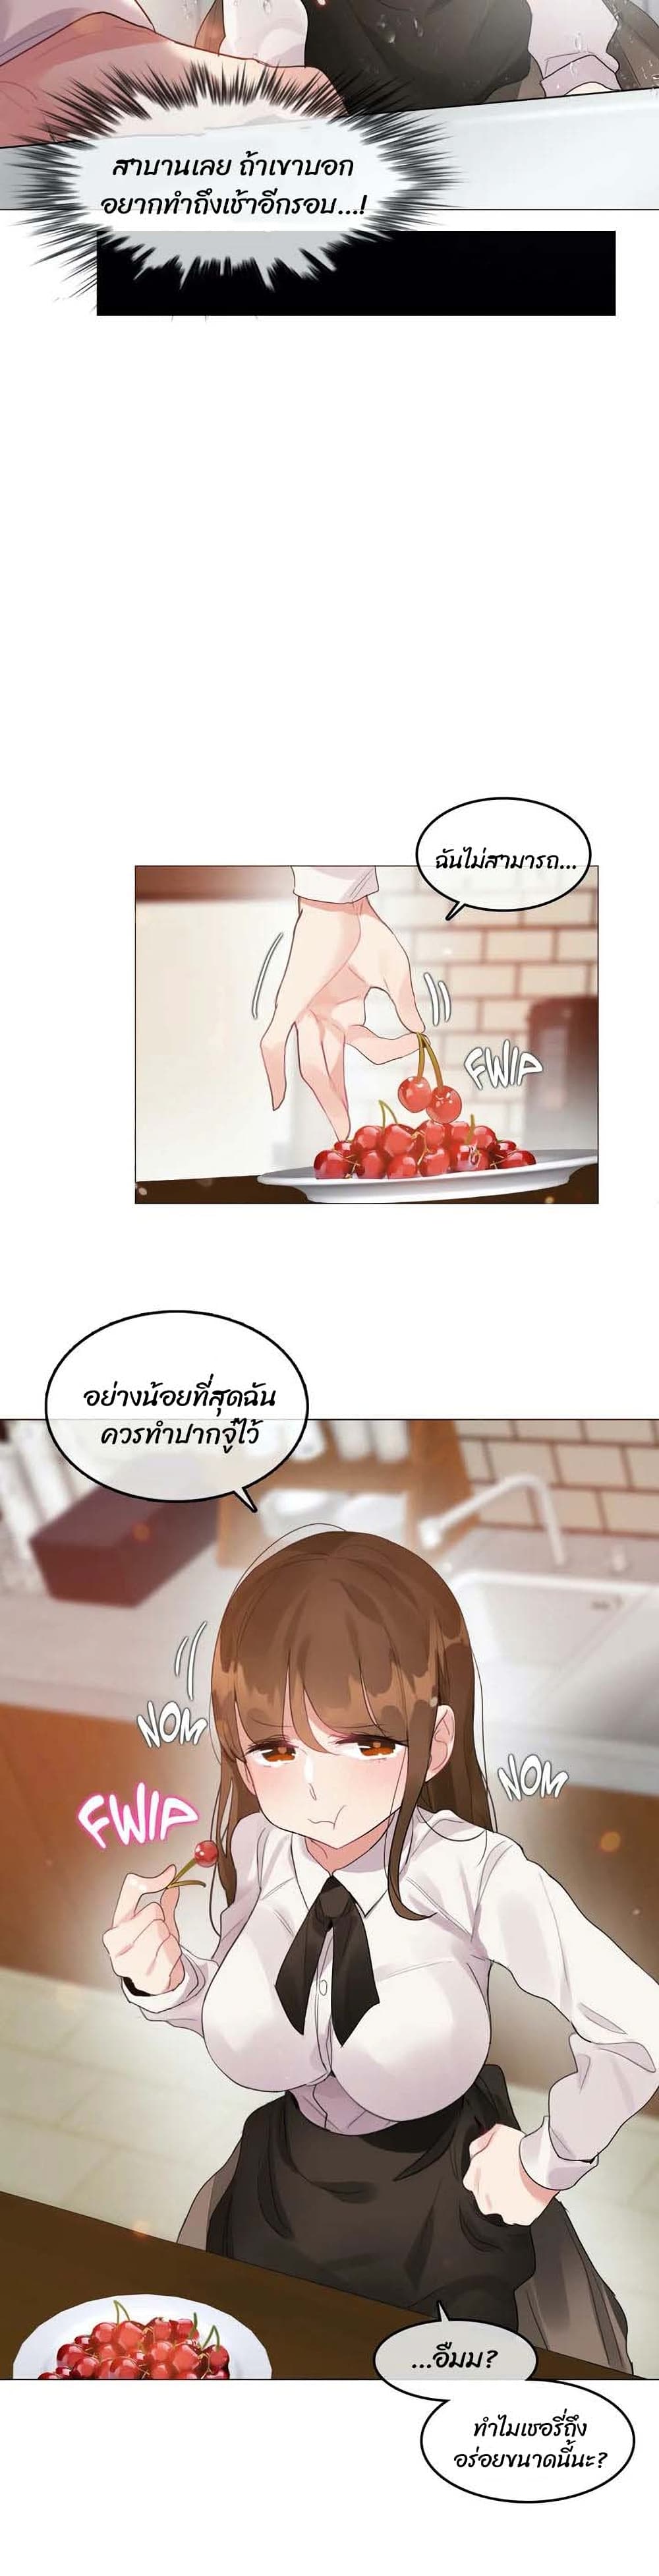 A Pervert's Daily Life 87 (6)